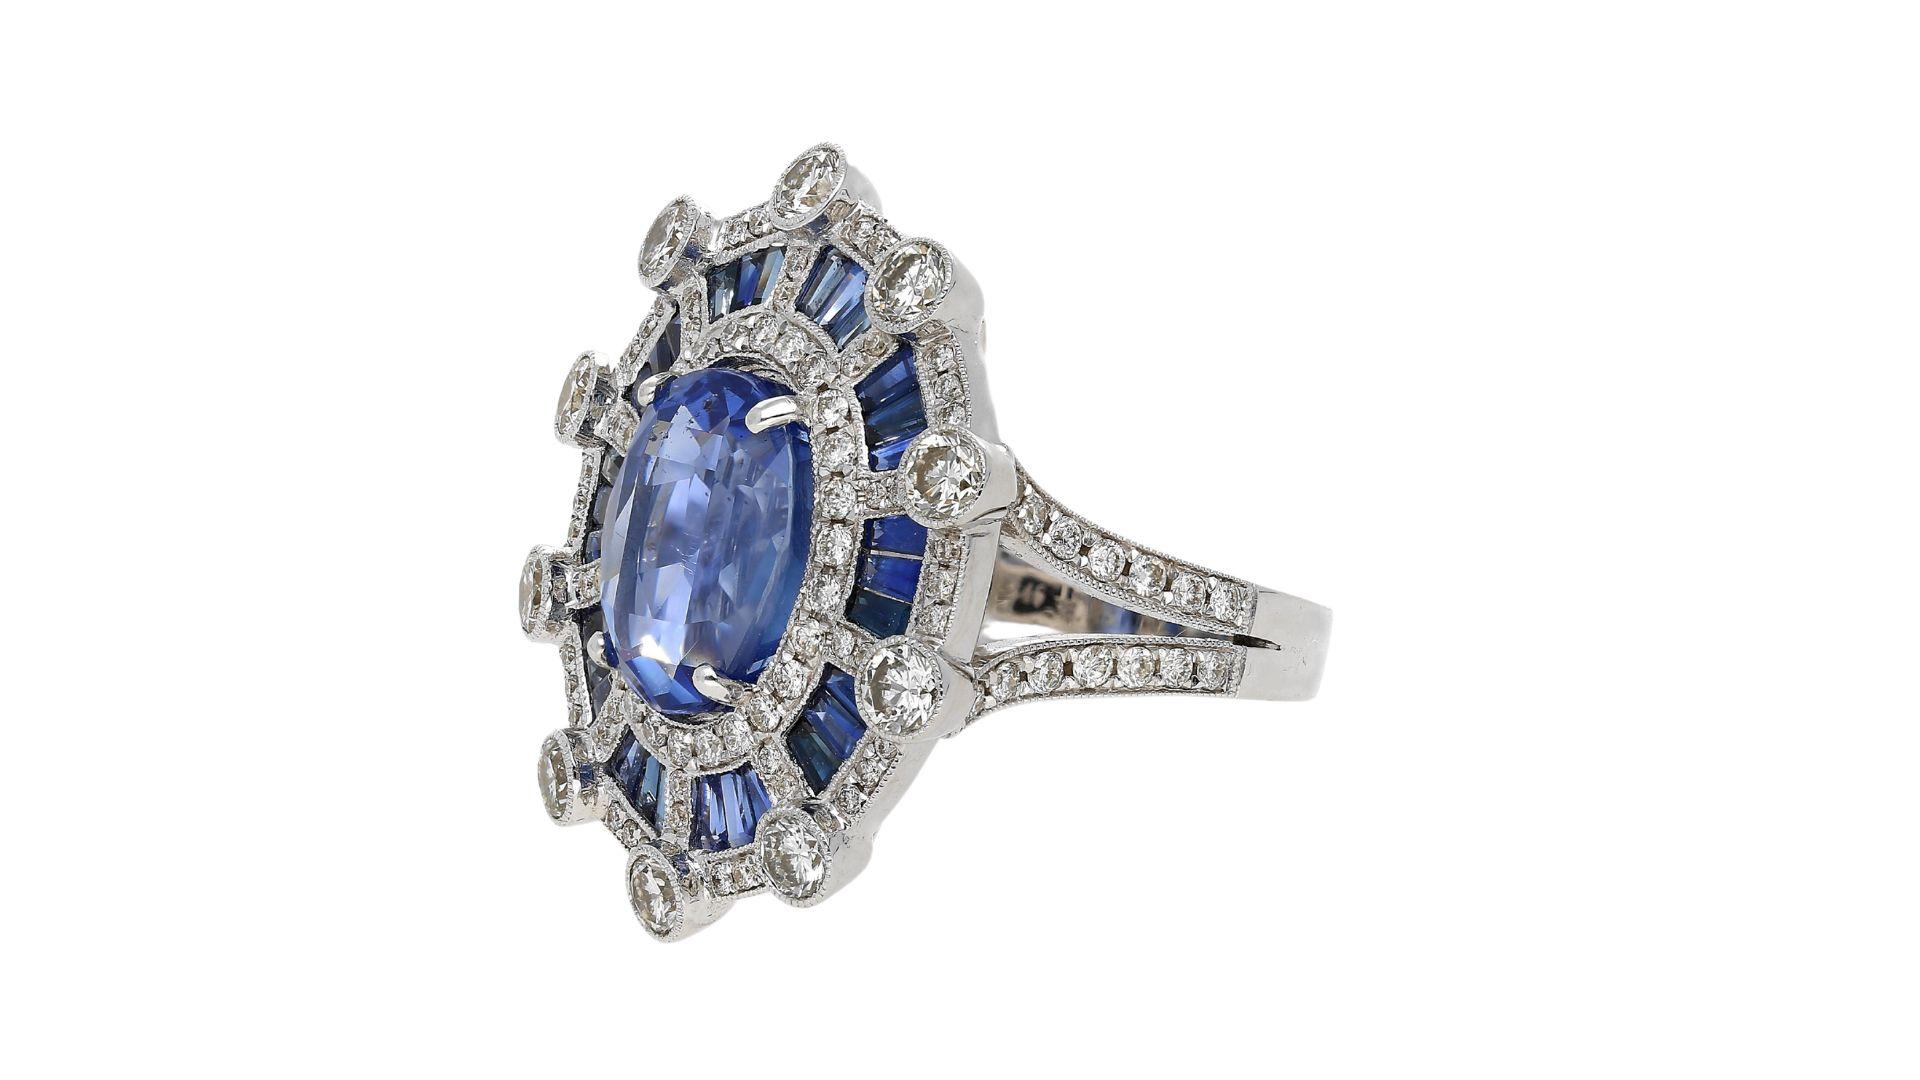 GIA certified 8.46 carat oval cut no heat Sri-Lanka Blue Sapphire & diamond halo ring in geometric art deco style setting. Encompassing the main sapphire are tension set baguette cut sapphires (3.35 cttw), 104 round cut diamonds (0.95 cttw), and 10